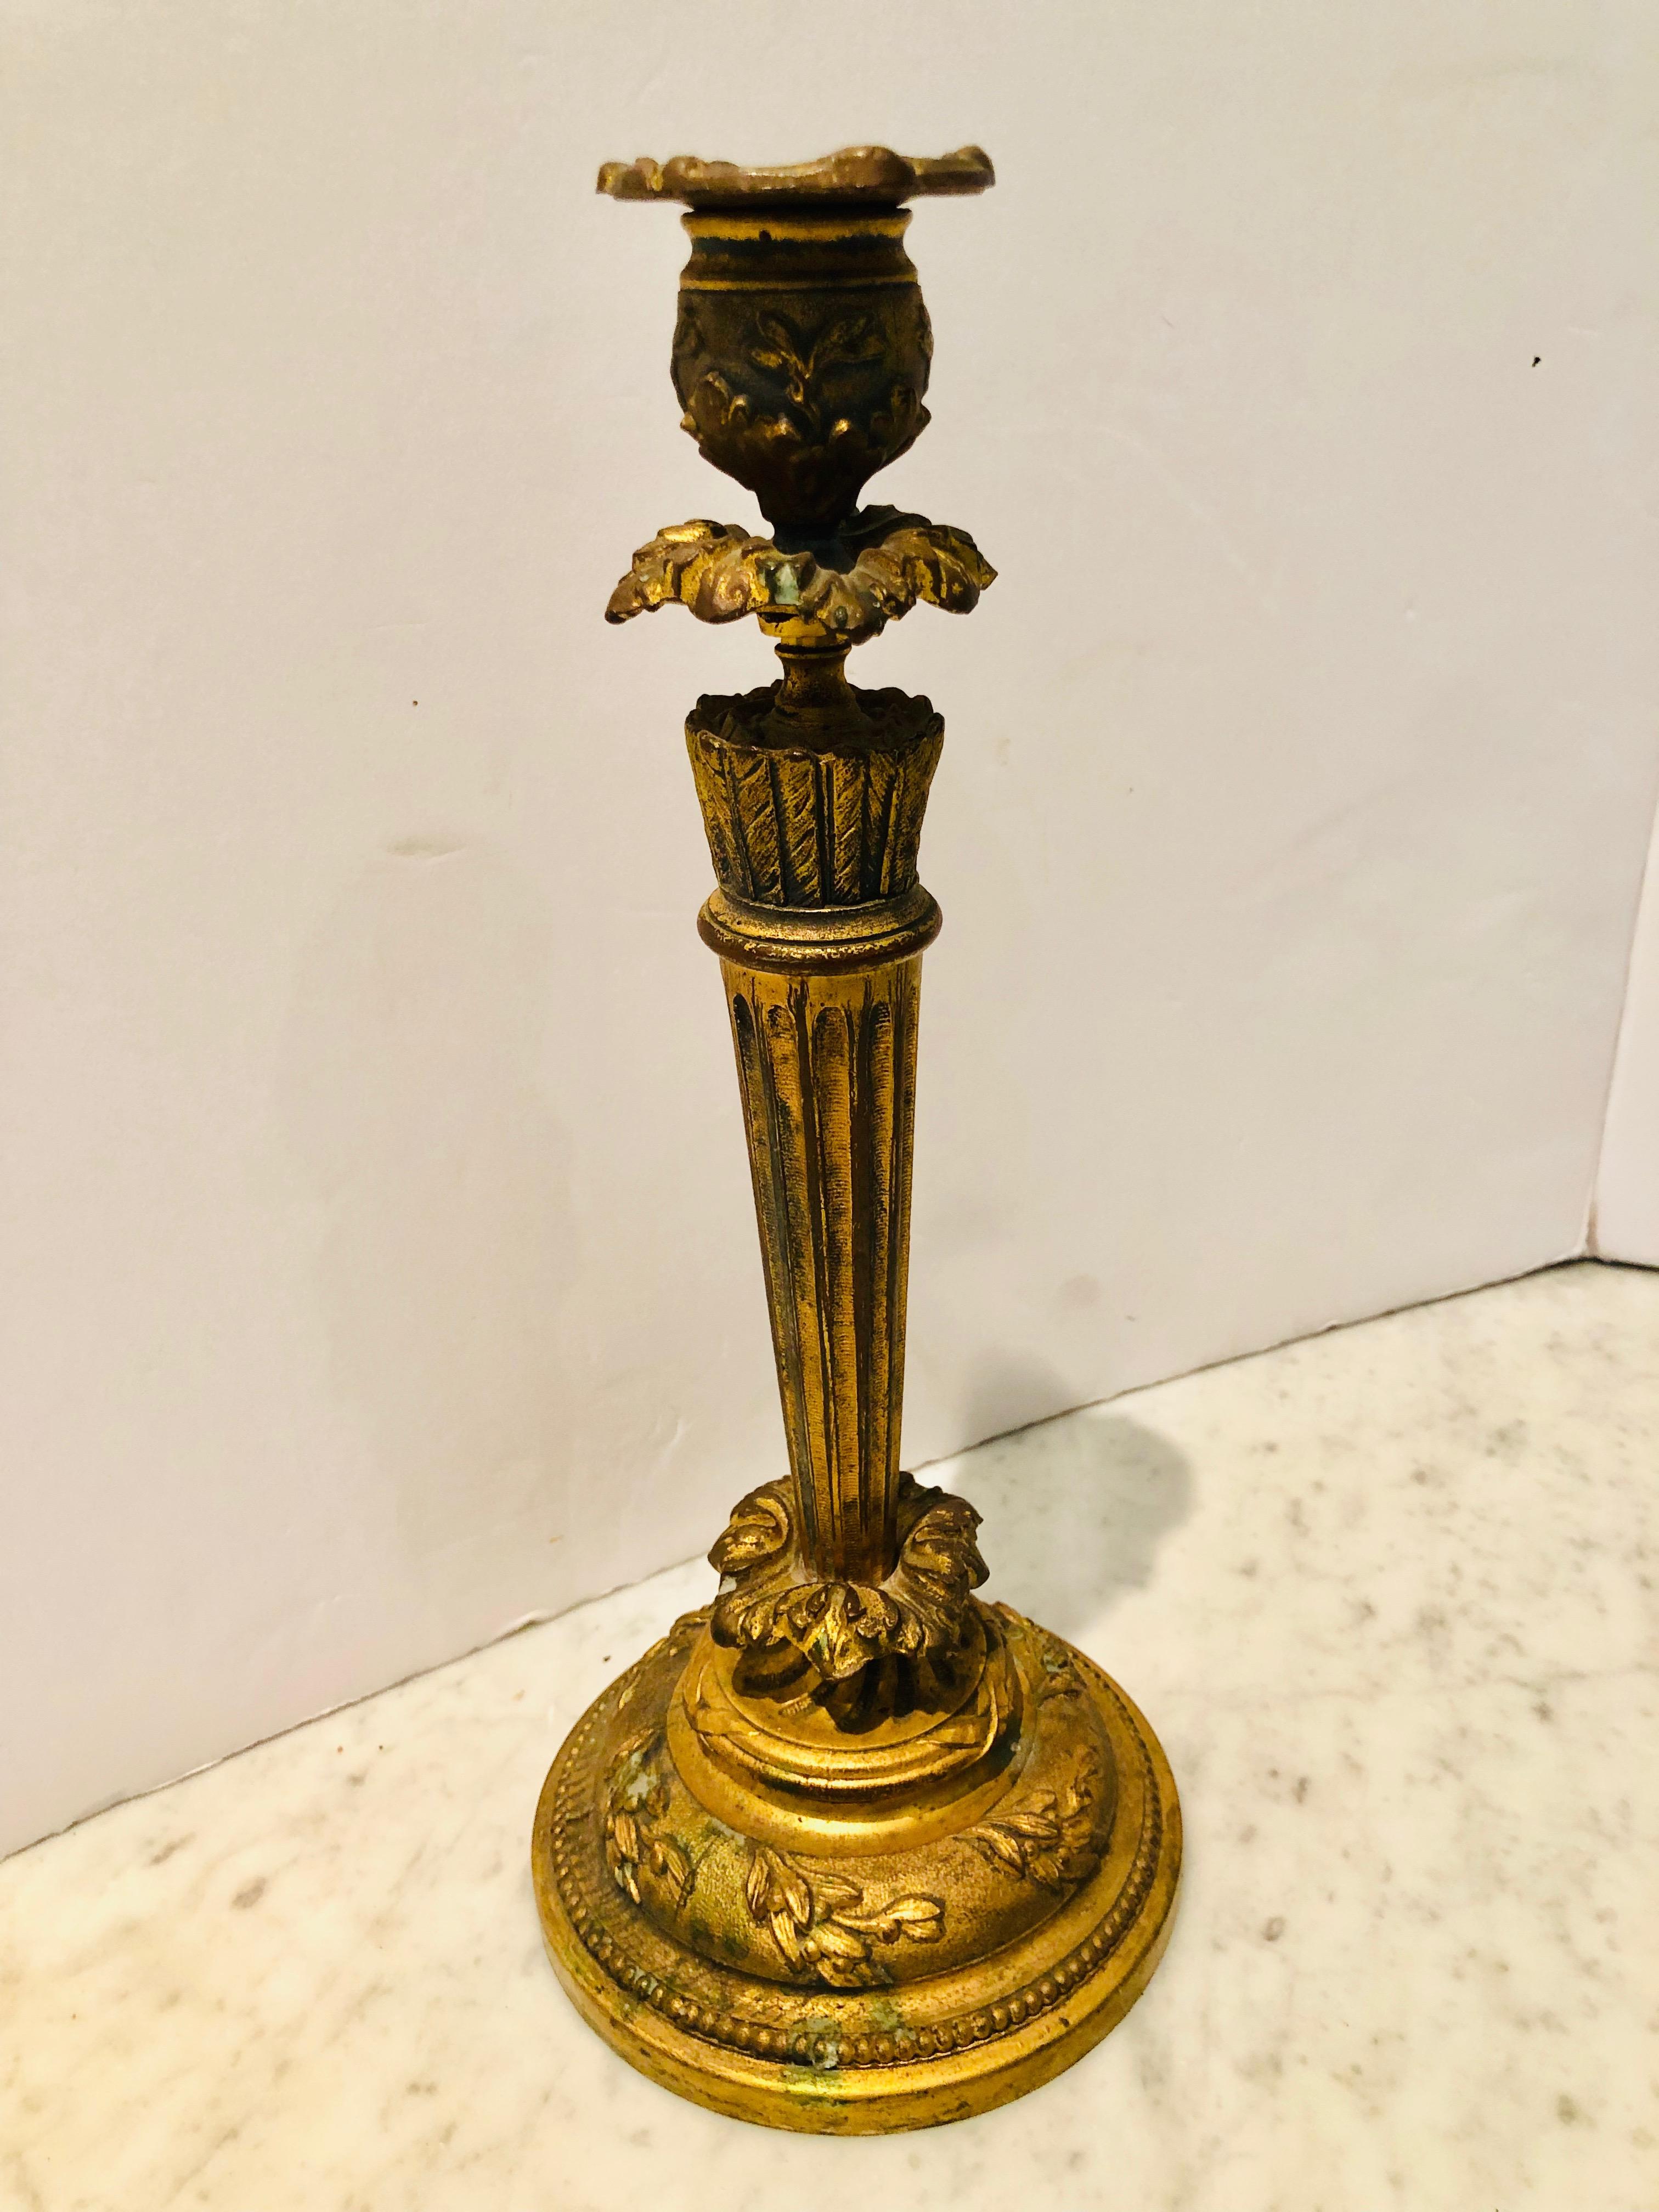 Lovely pic of antique candlesticks in solid bronze. Floral decoration and beading around the base and top. Bobeche is removable for ease of cleaning.